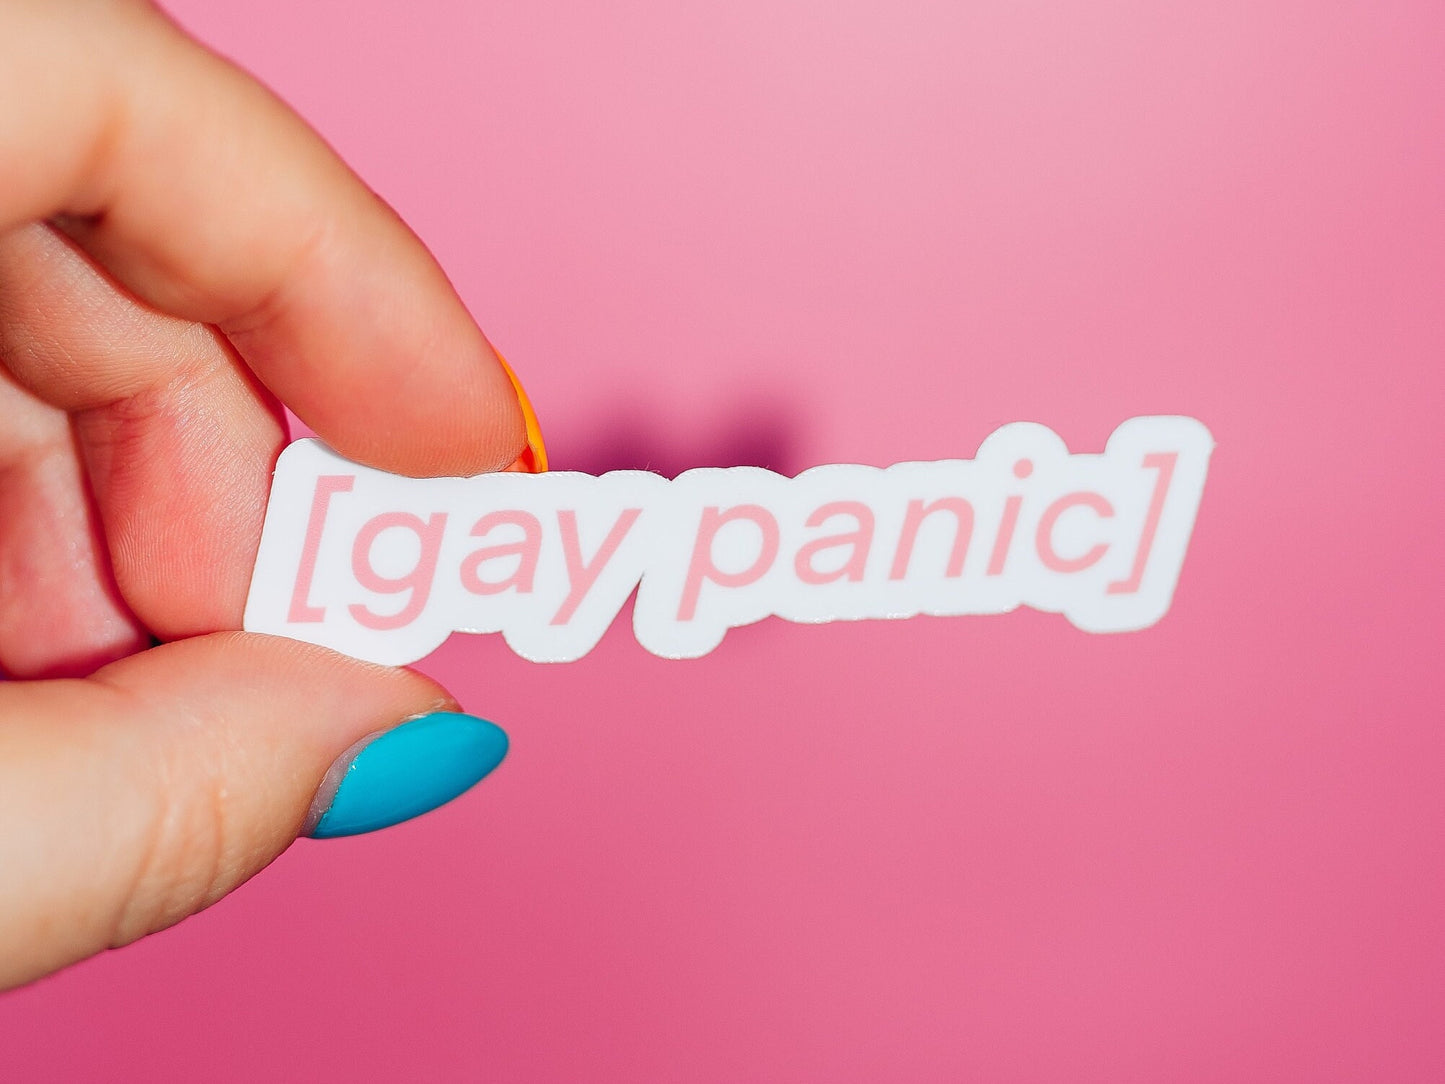 Gay Panic Sticker, Funny Meme Heart, LGBTQ+ Friendly, Safe Space, Laptop Sticker, Water Bottle Stopper, Gay Pride Equality, Pop Culture